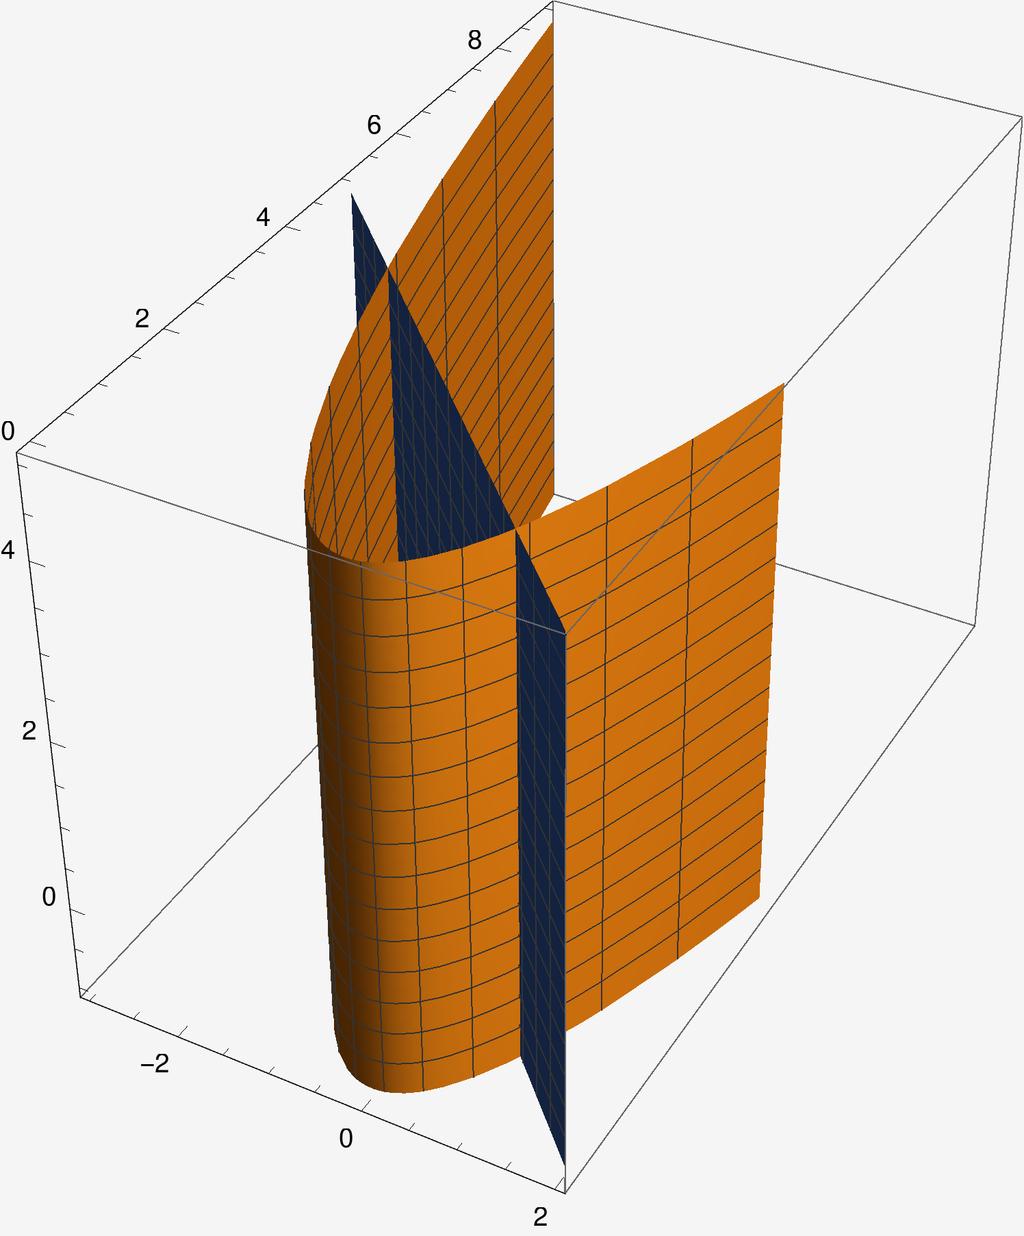 3 4 3 () omain is - - The solid is a cylinder with well-defined lower surface z, and upper surface z x + y +. The base domain in xy-plane is bounded by the two curves y x and x+y.